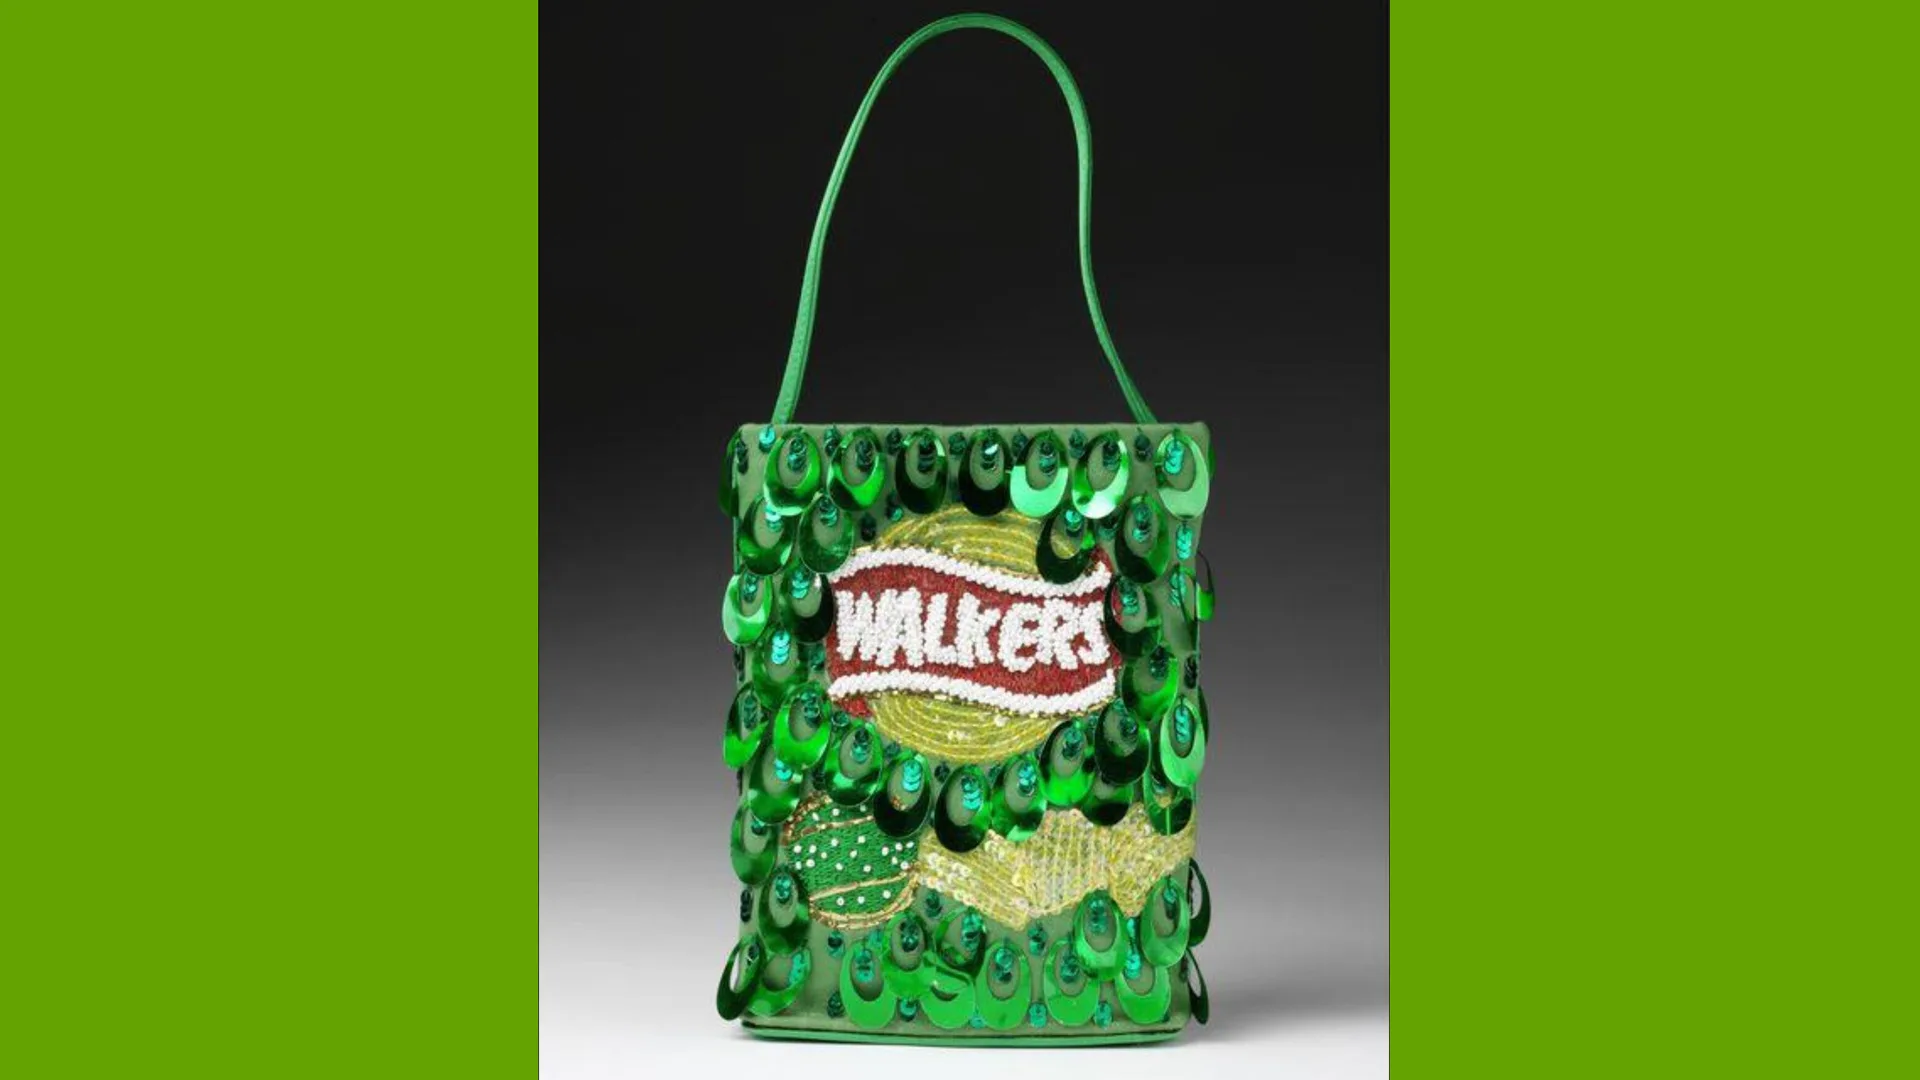 A photo of a V&A collection - a handbag made from green sequins and beads in the design of a Walkers crisp bag with a green chain